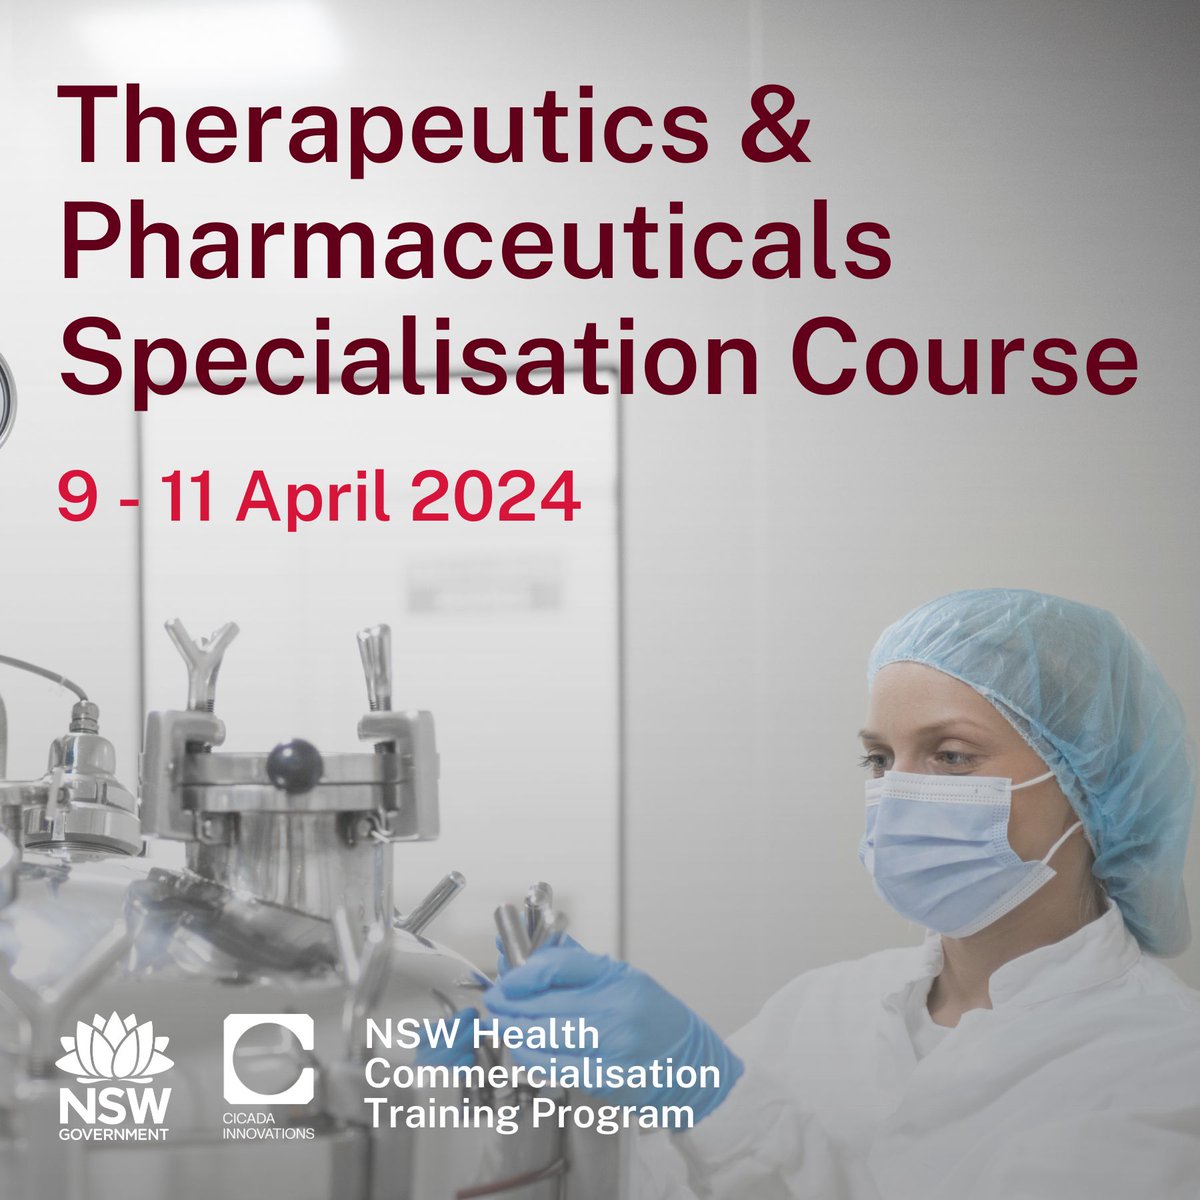 Join our FREE Pharmaceuticals & Therapeutics Specialisation course as part of the @NSWHealth Commercialisation Training Program: cicadainnovations.com/programs/ctp-s… Delivered by @CicadaInnovations in partnership w/ Sydney Pharmacy School, Aus' leading centre for pharma education.